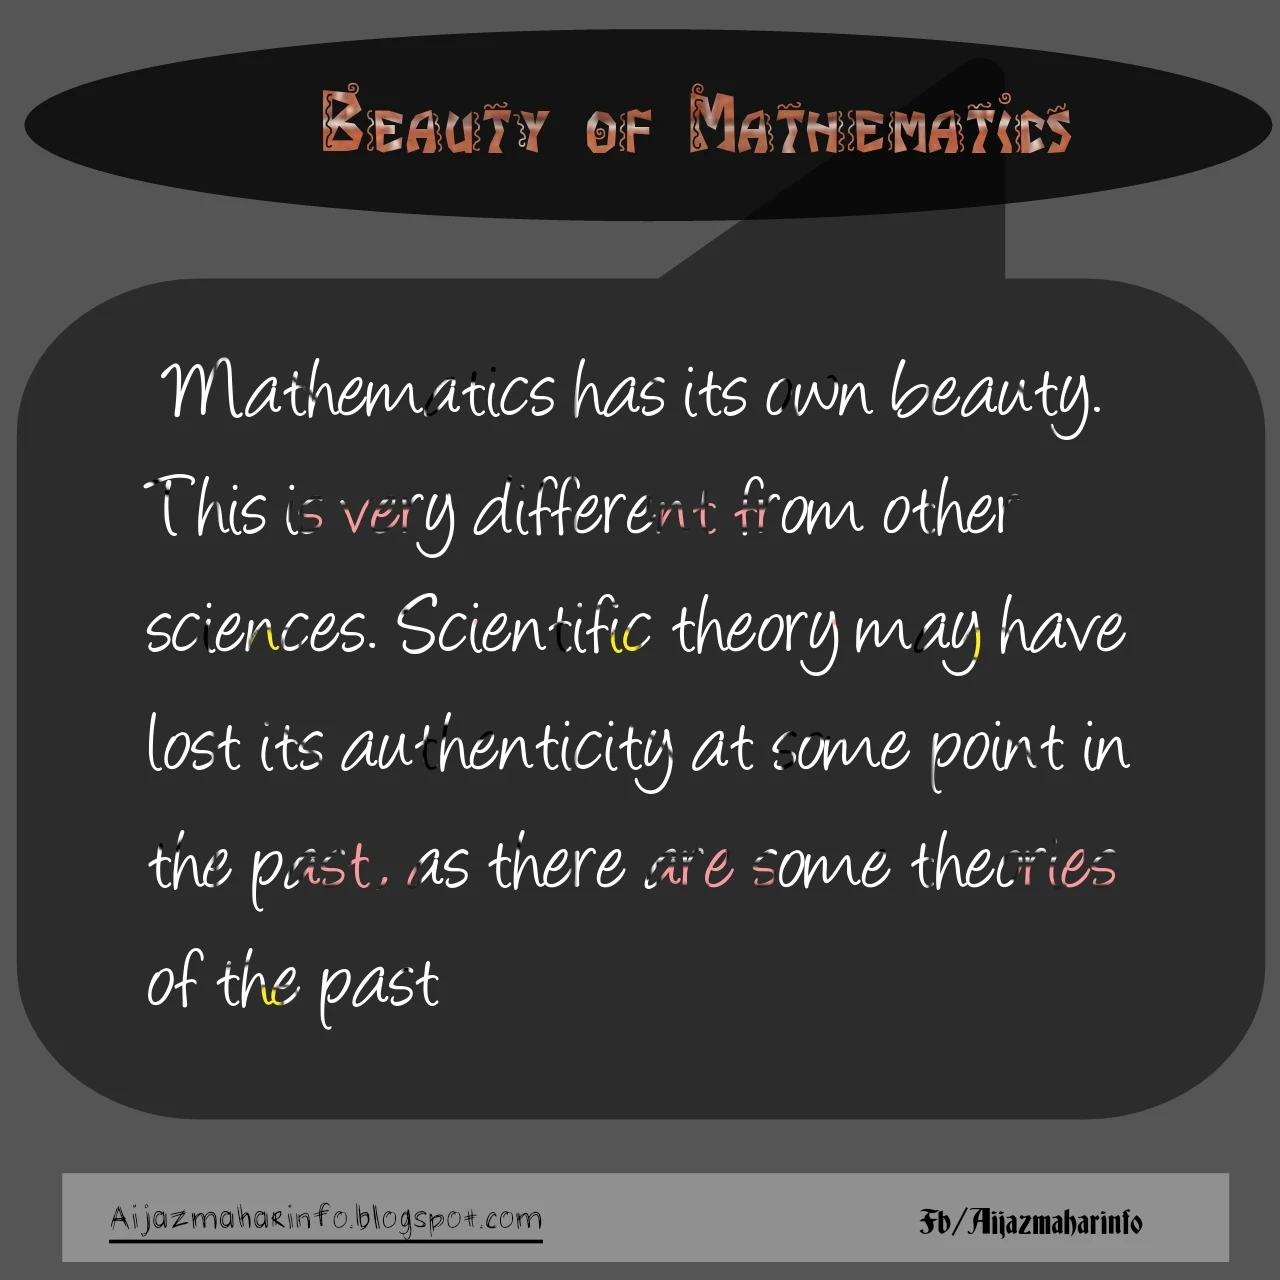 Mathematics has its own beauty.  This is very different from other sciences. Scientific theory may have lost its authenticity at some point in the past, as there are some theories of the past that were ever known today are merely part of history.